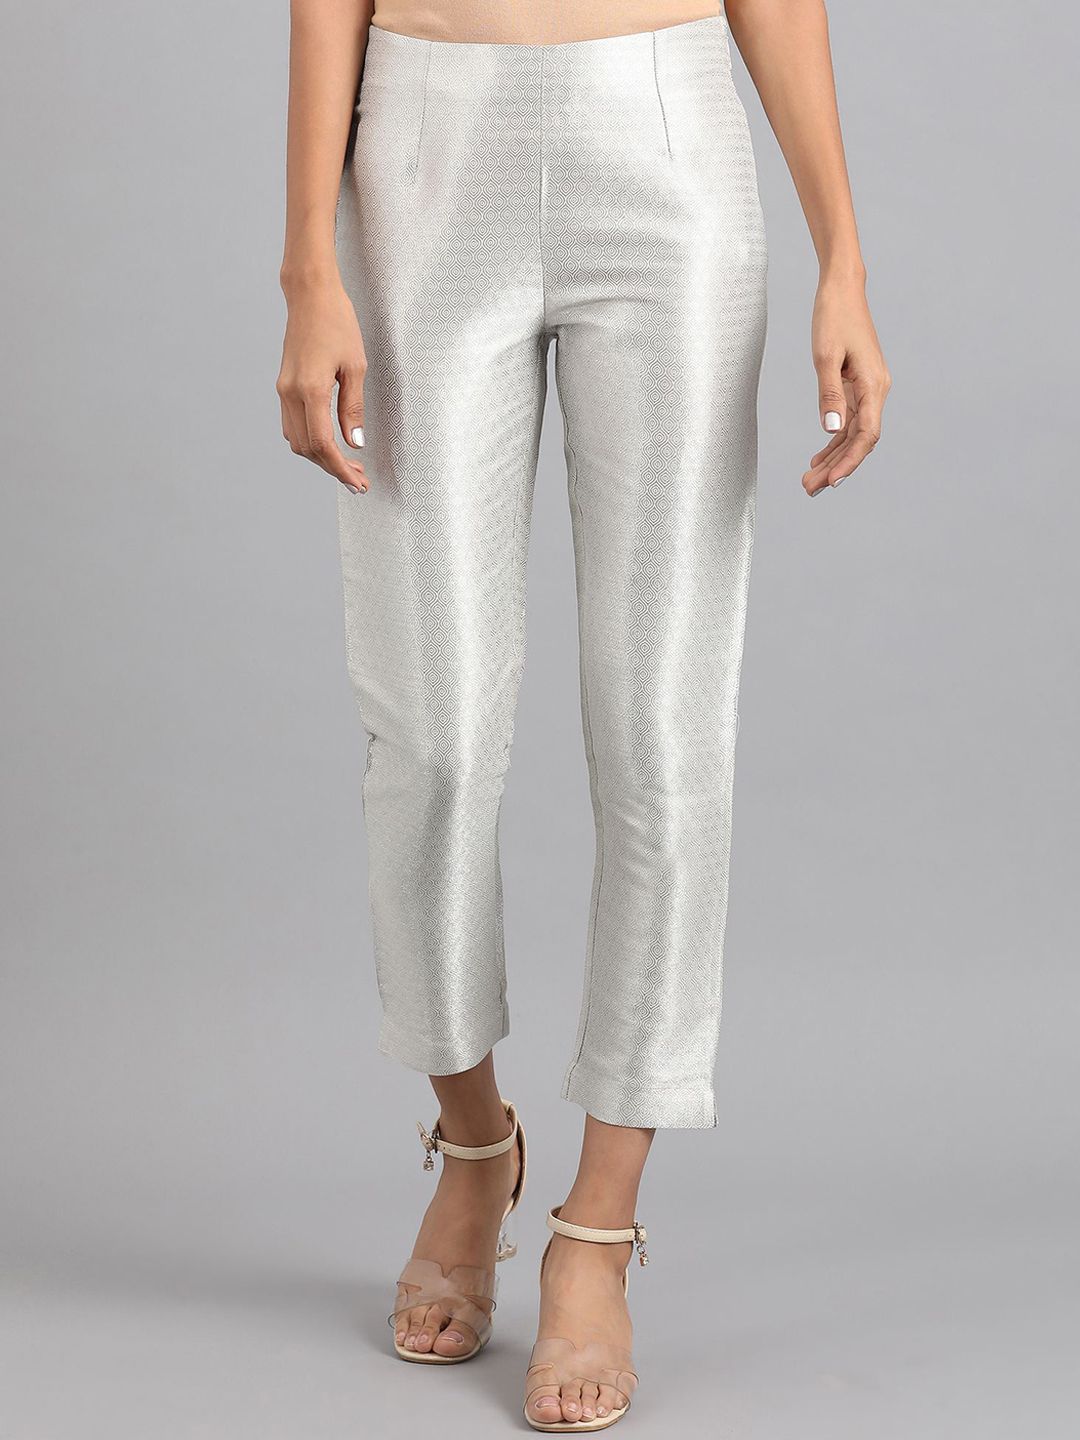 W Women Silver-Toned Striped Slim Fit Trousers Price in India